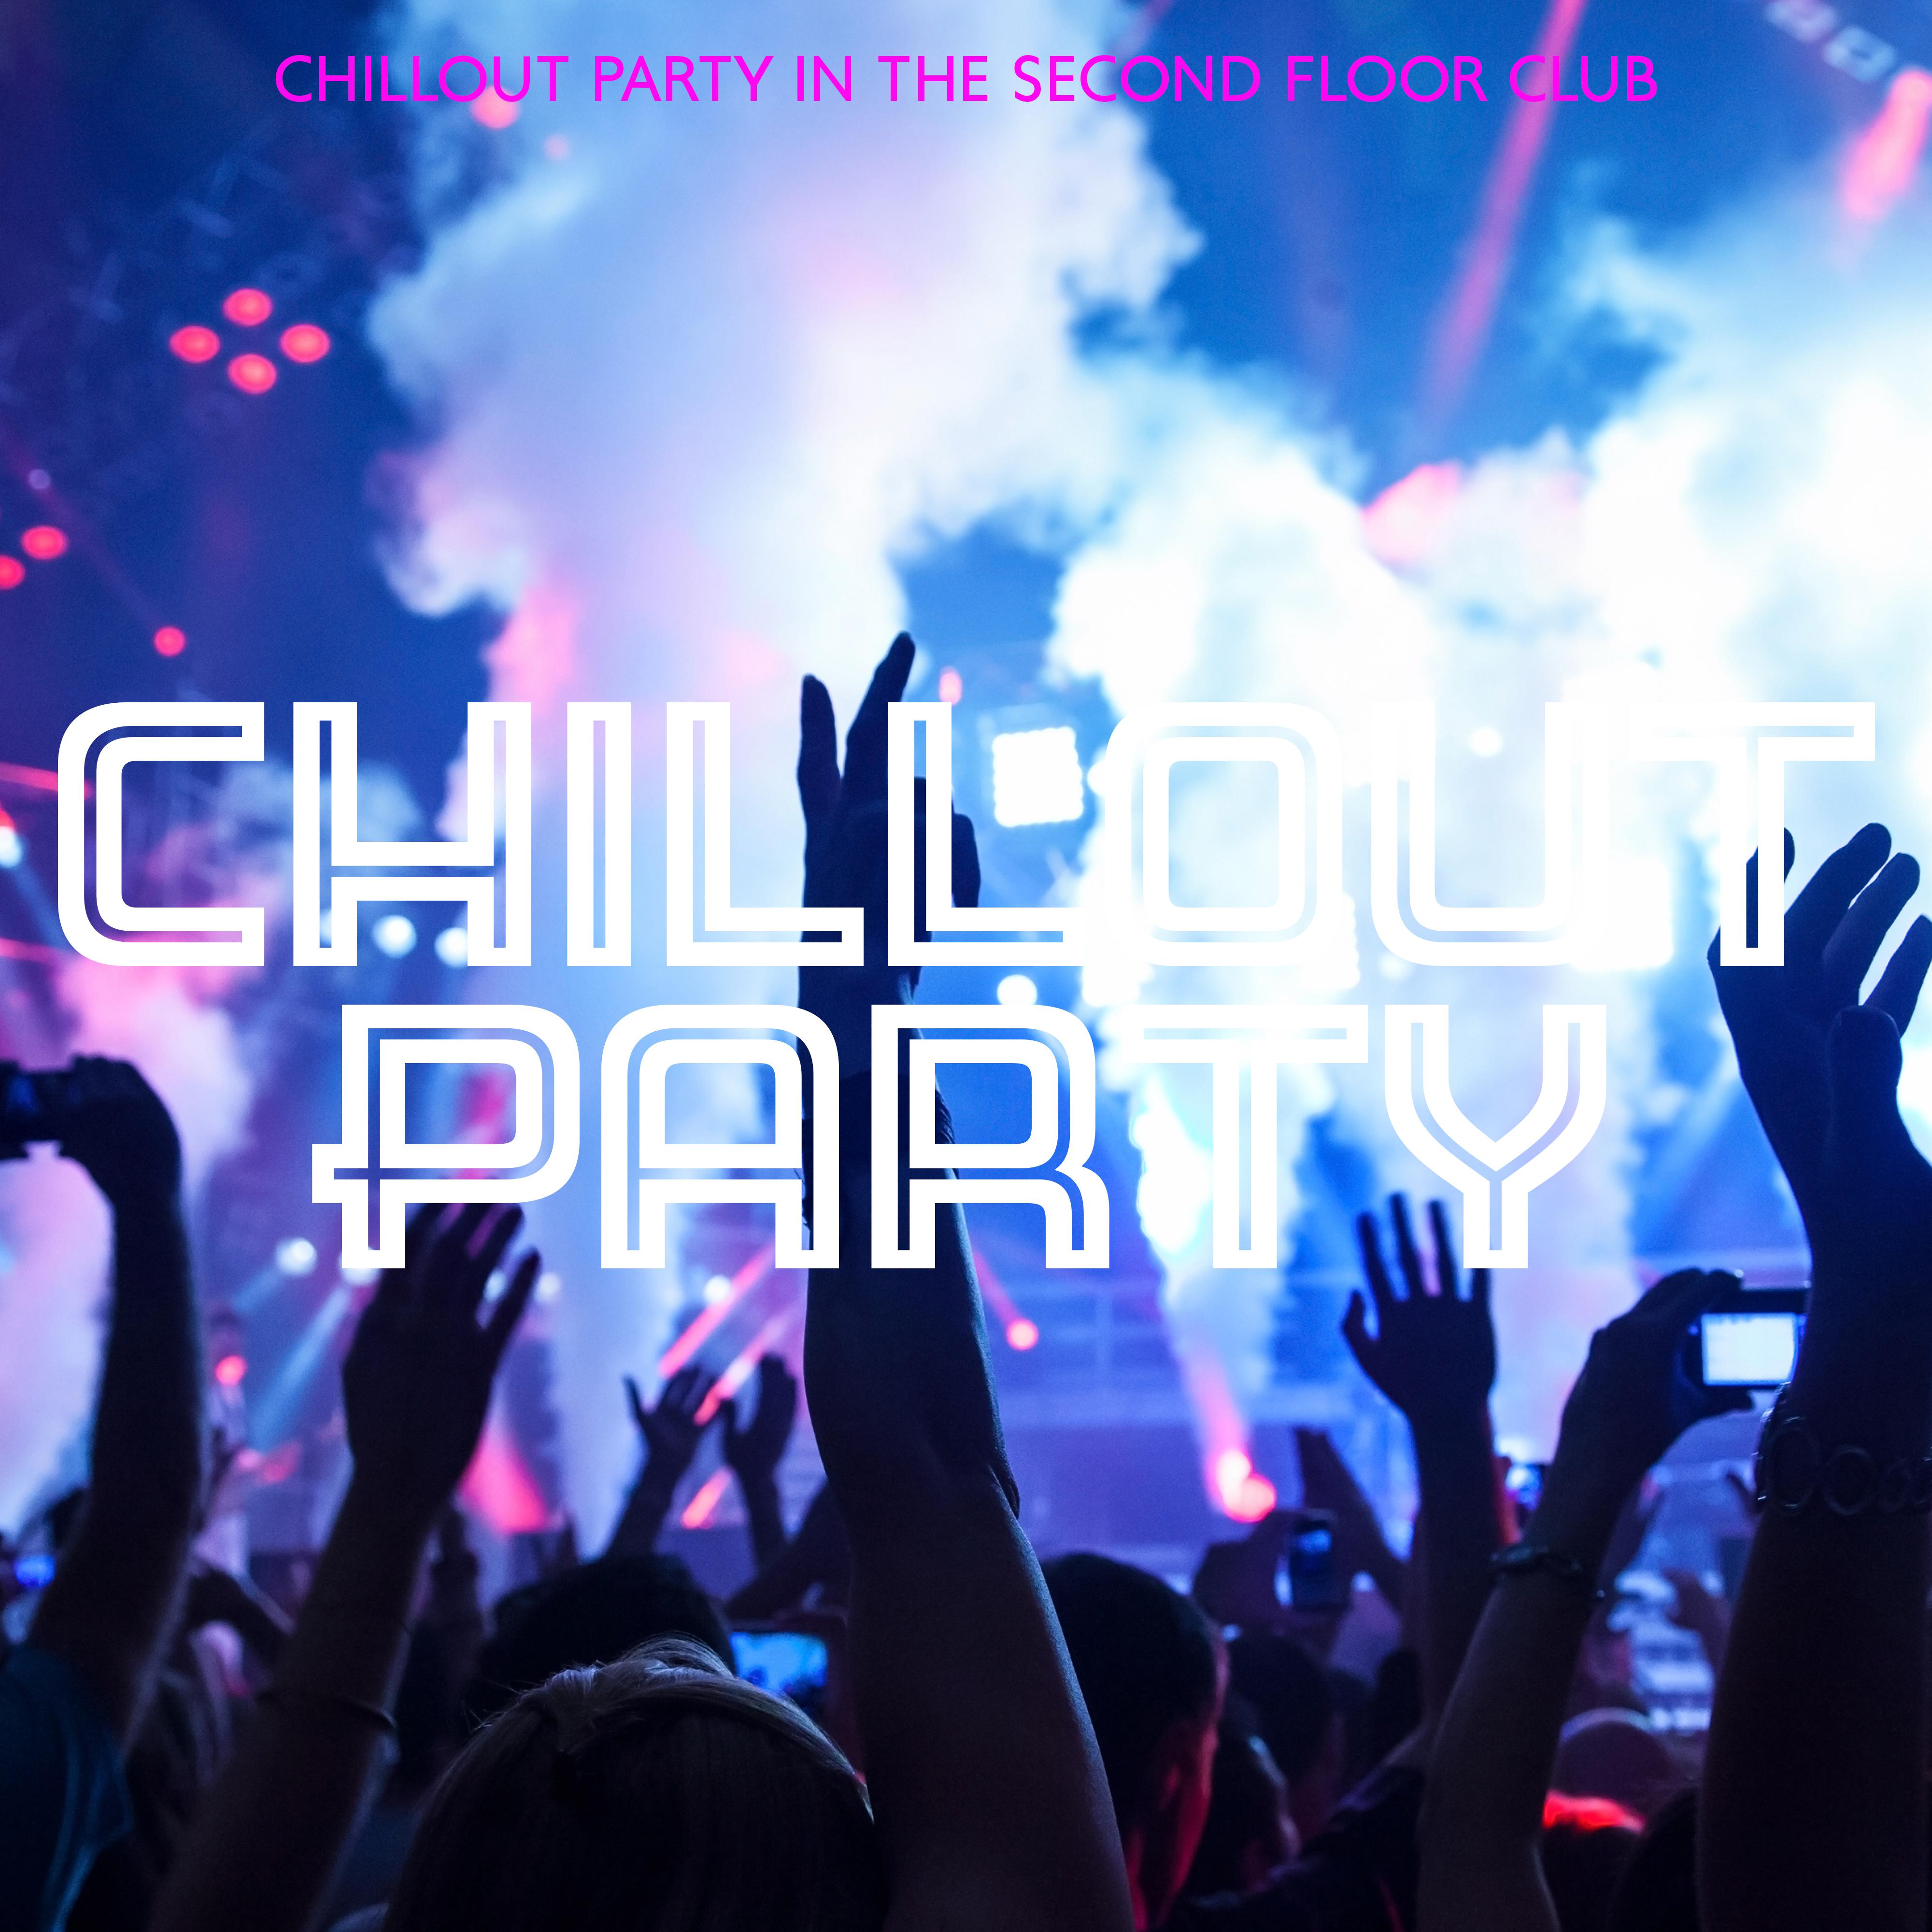 Chillout Party in the Second Floor Club: 2019 Chill Out Hottest Music for Dance Party in the Club, on the Beach or at Home, Hotel Lounge Songs, Low BPM Electronic Tracks